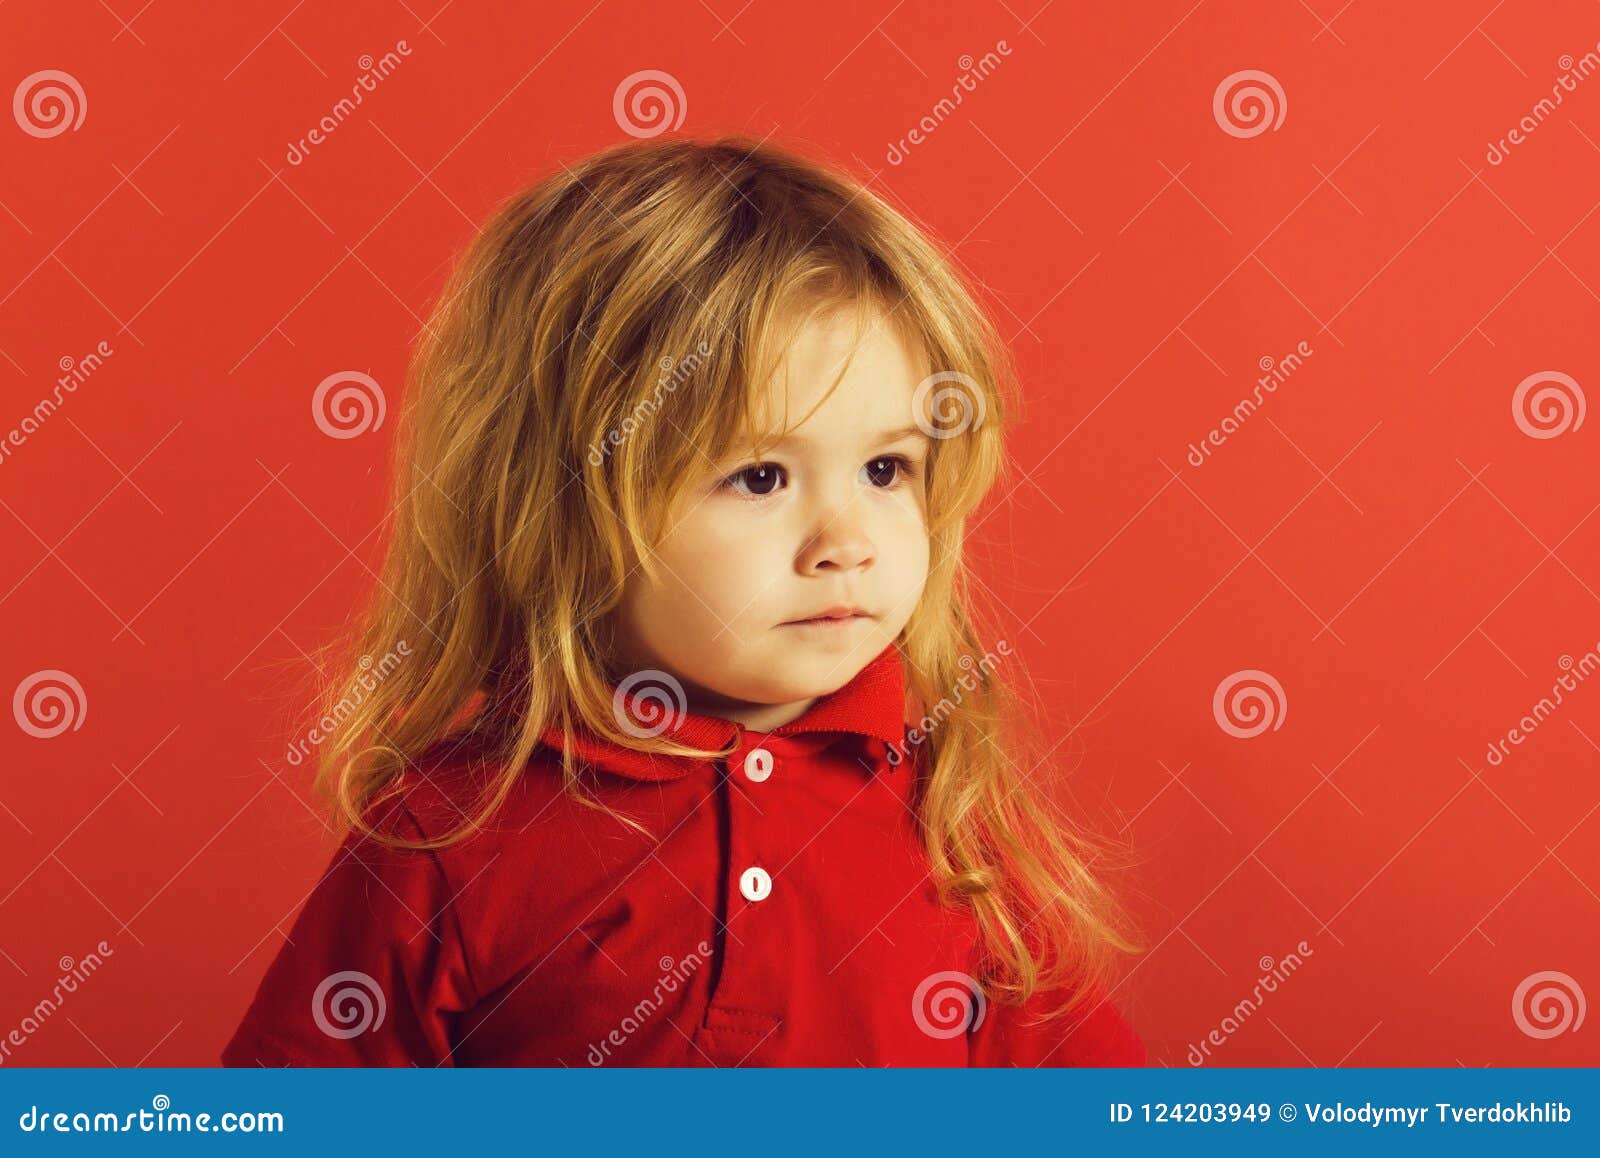 Small Baby Boy With Long Blonde Hair In Red Shirt Stock Image